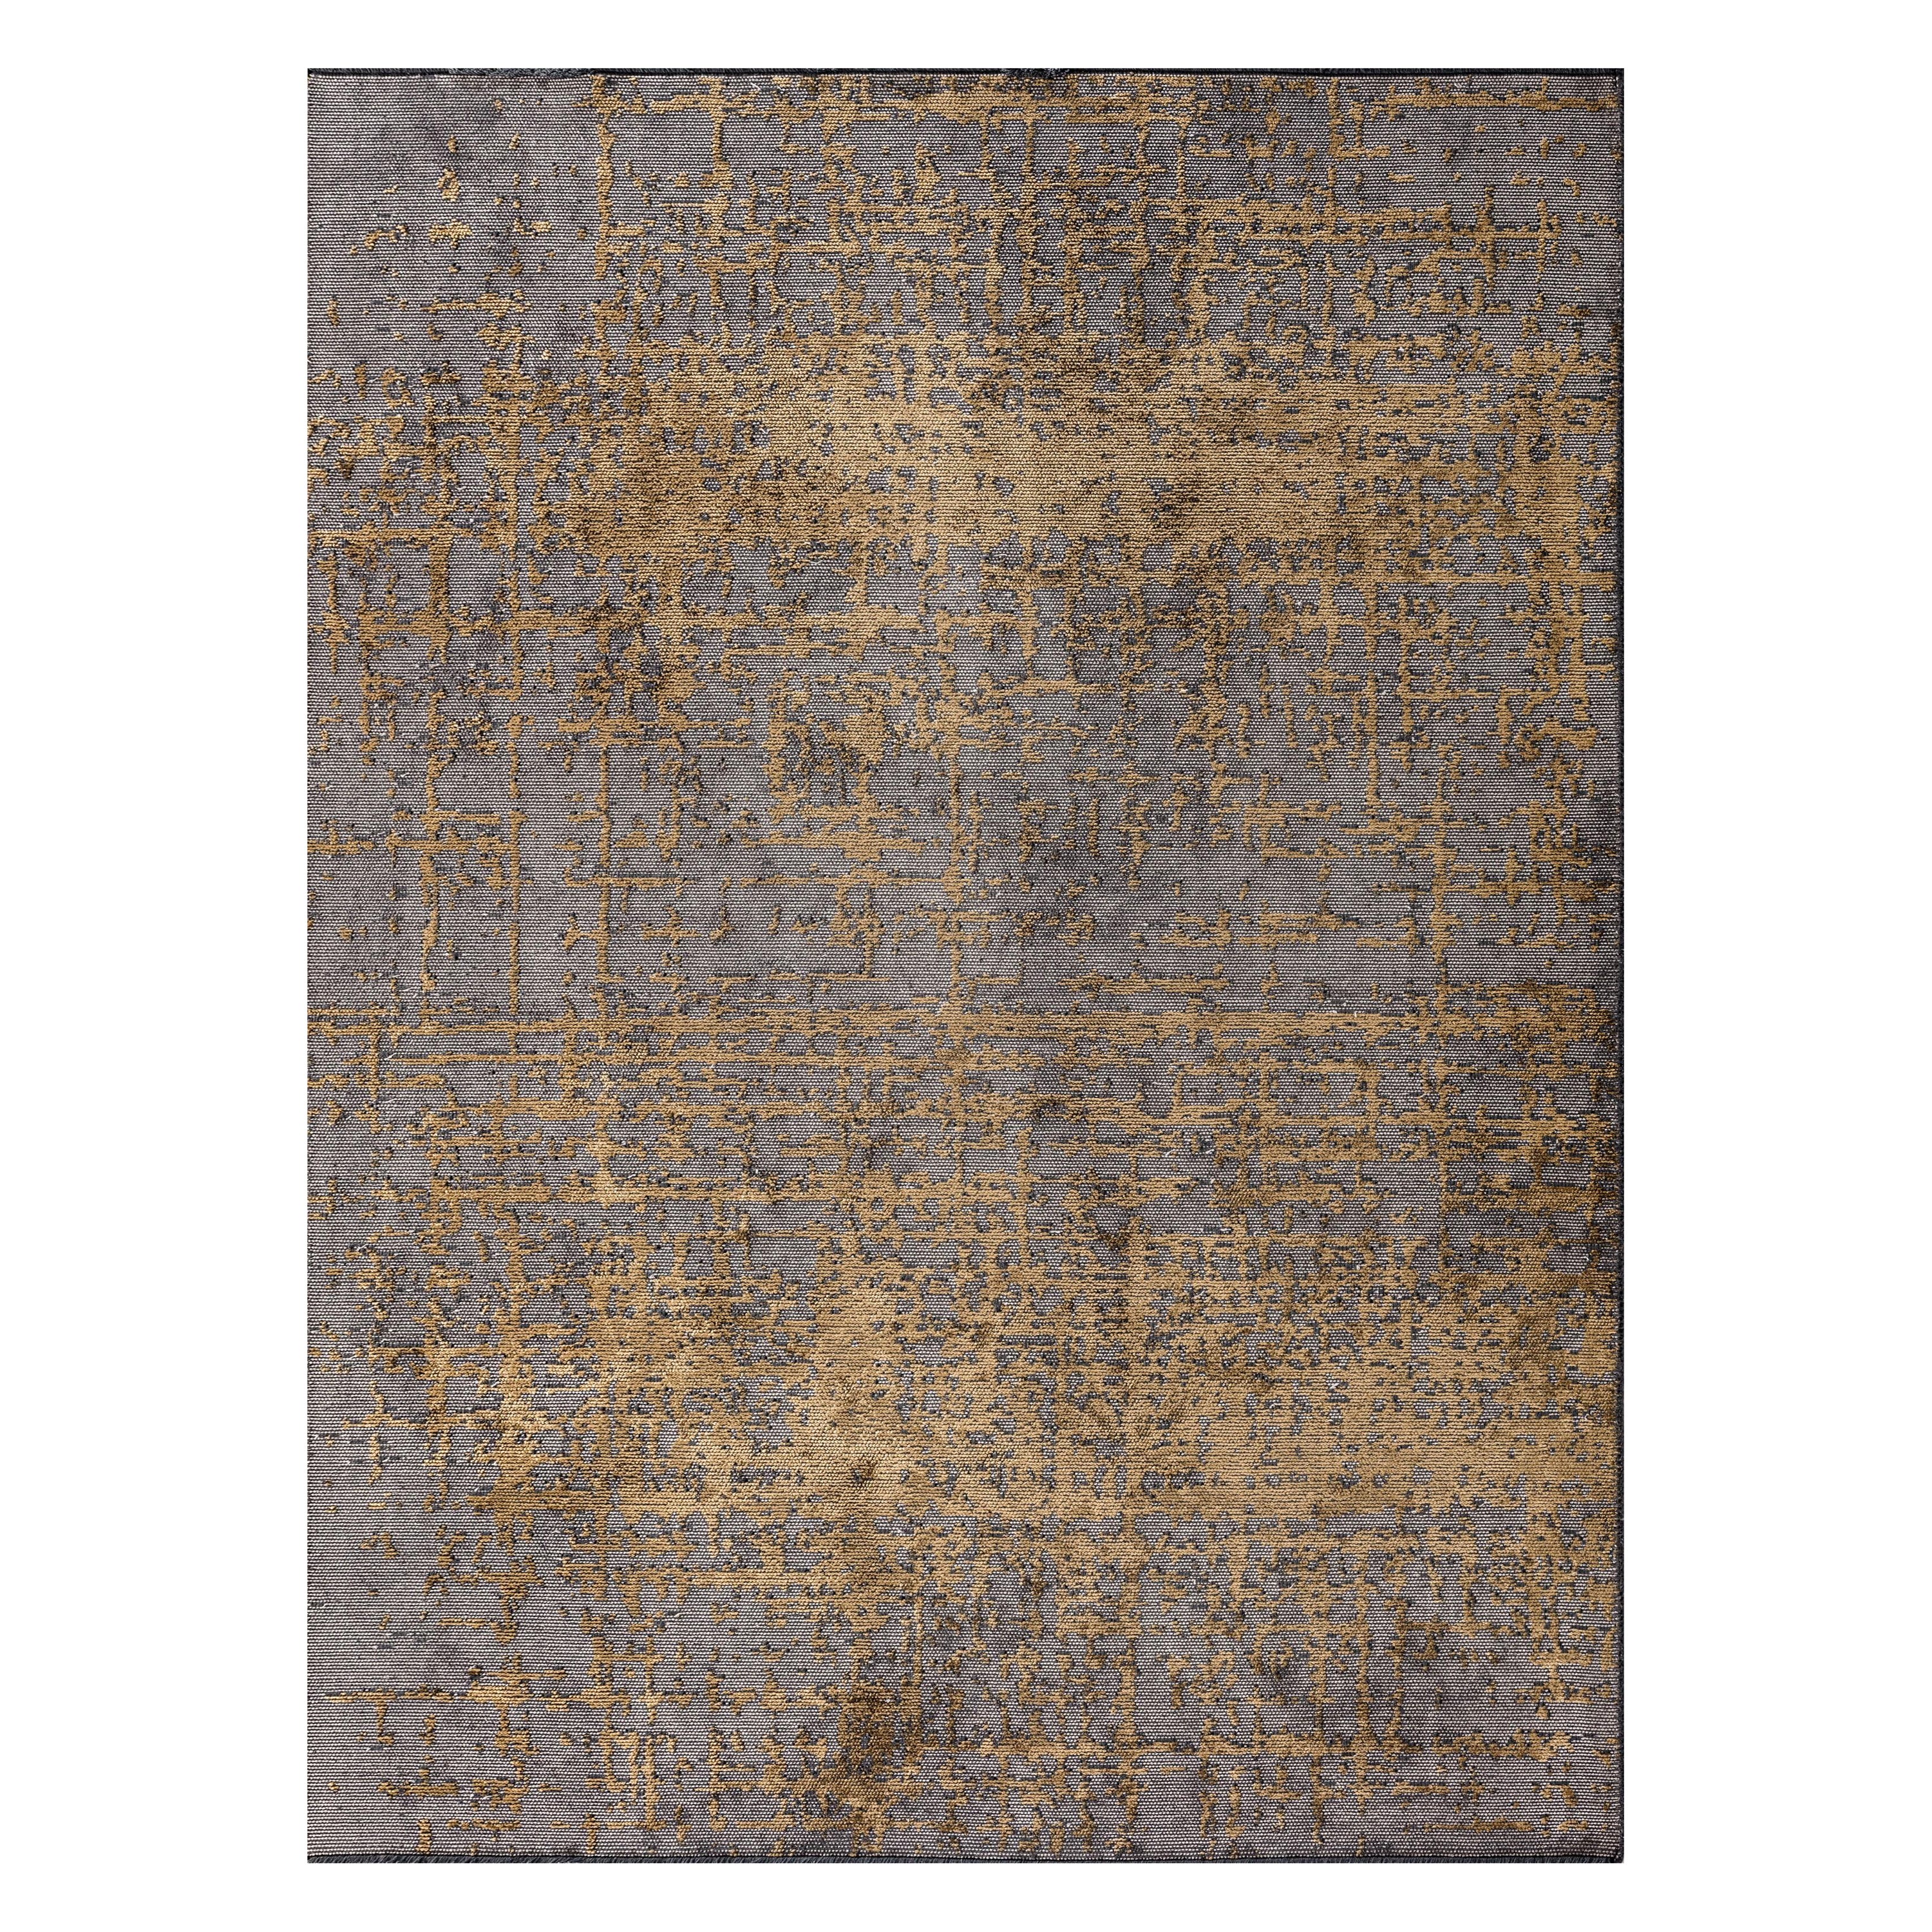 Modern Abstract Luxury Hand-Finished Area Rug